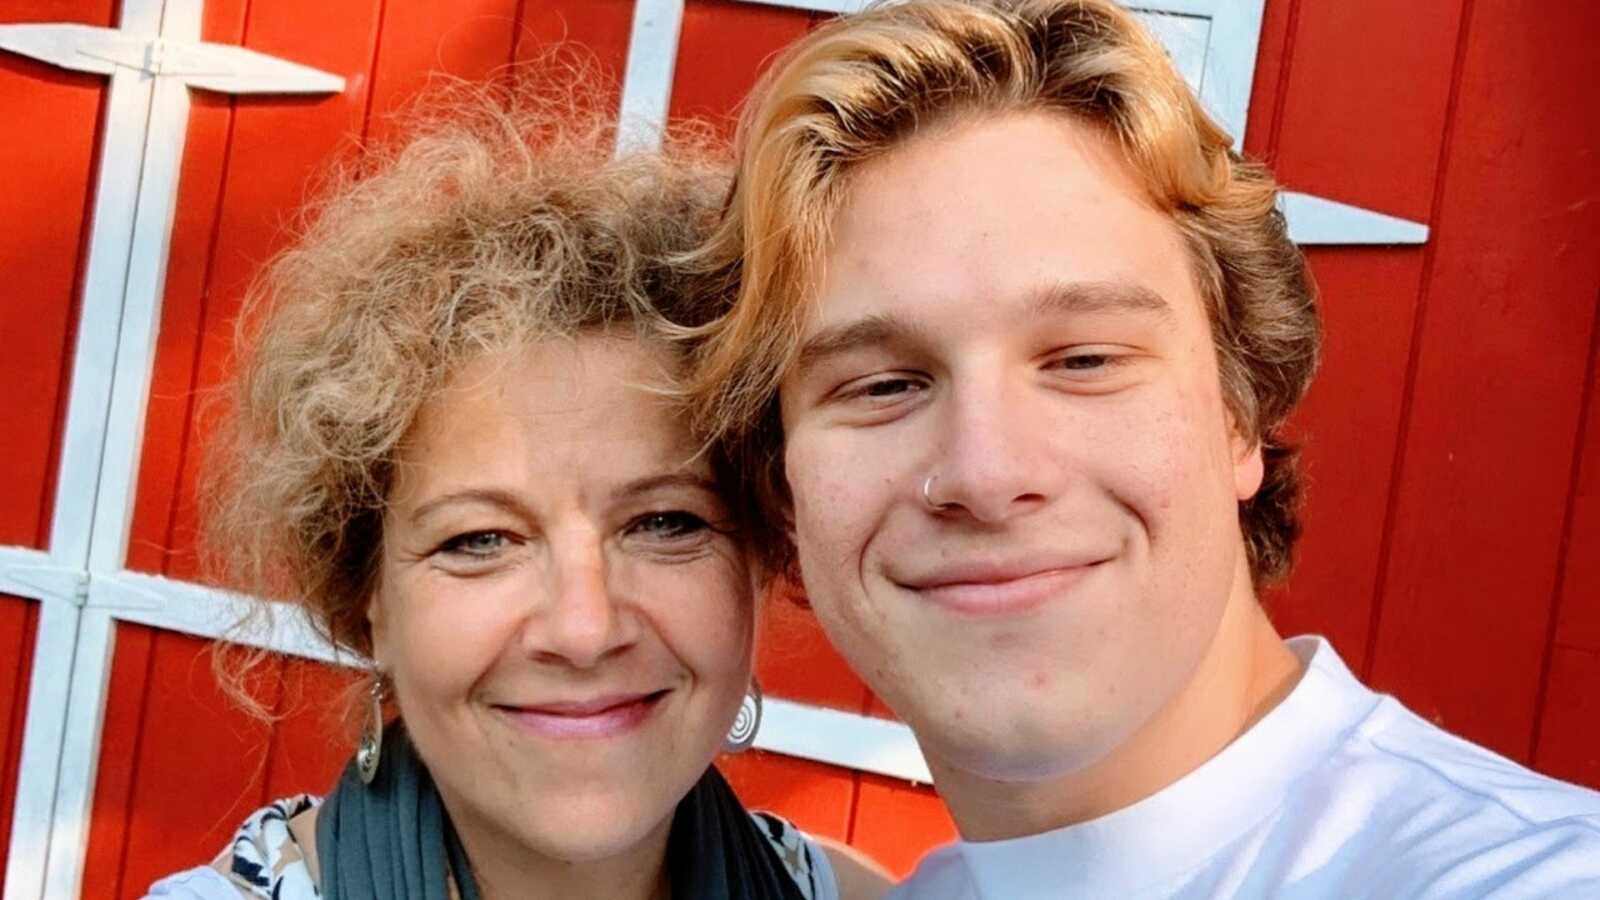 Mom and son take a selfie together before the son goes off to college